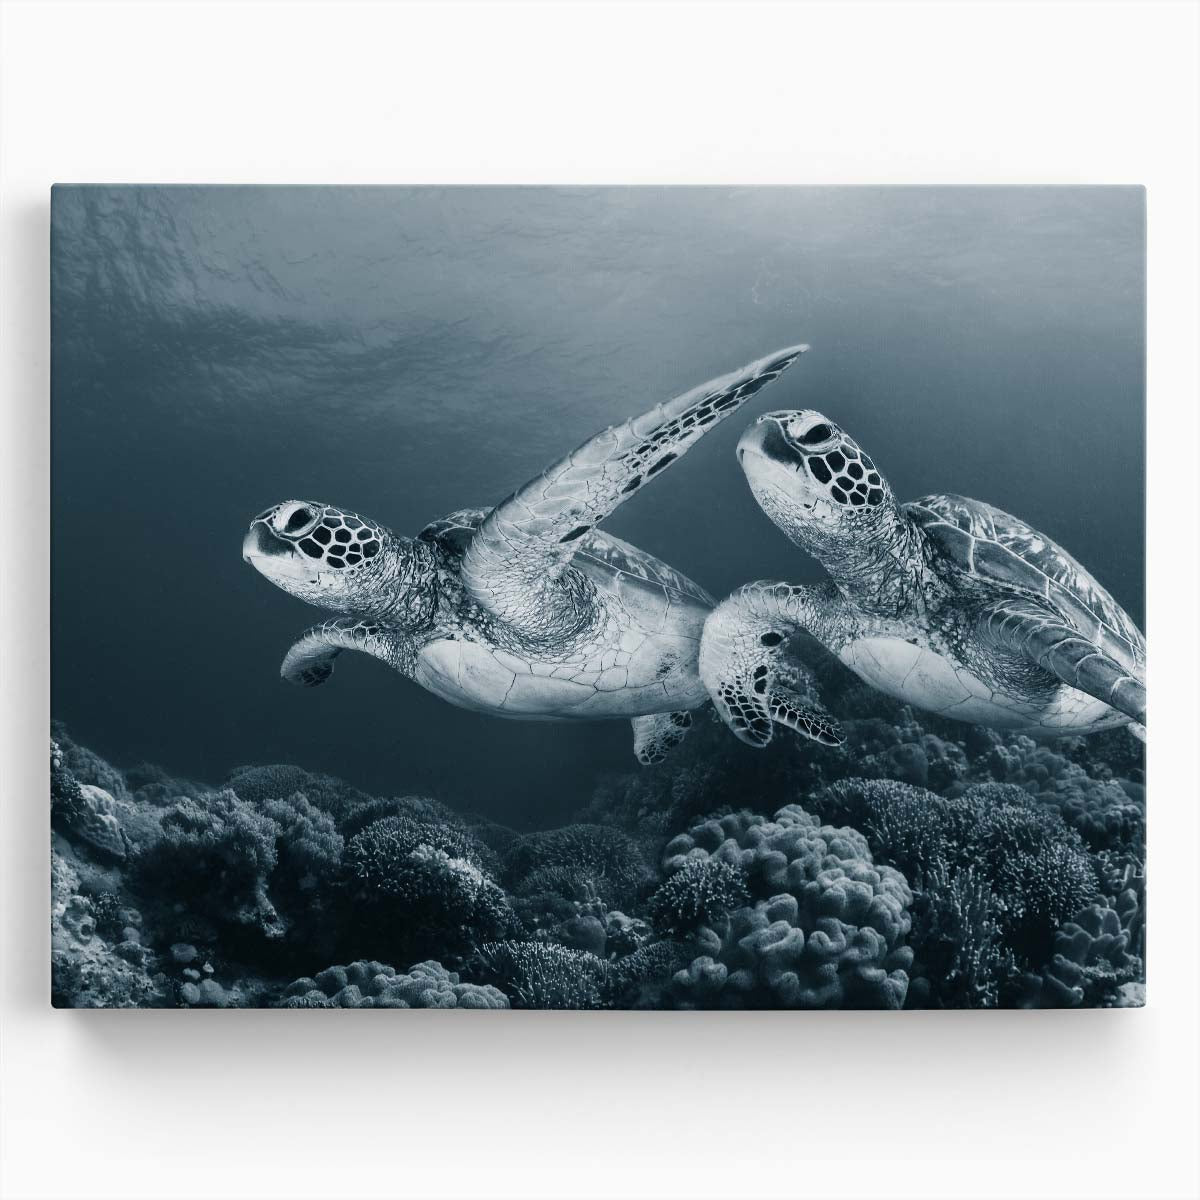 Majestic Sea Turtles Underwater Panorama Photography, Apo Island Wall Art by Luxuriance Designs. Made in USA.